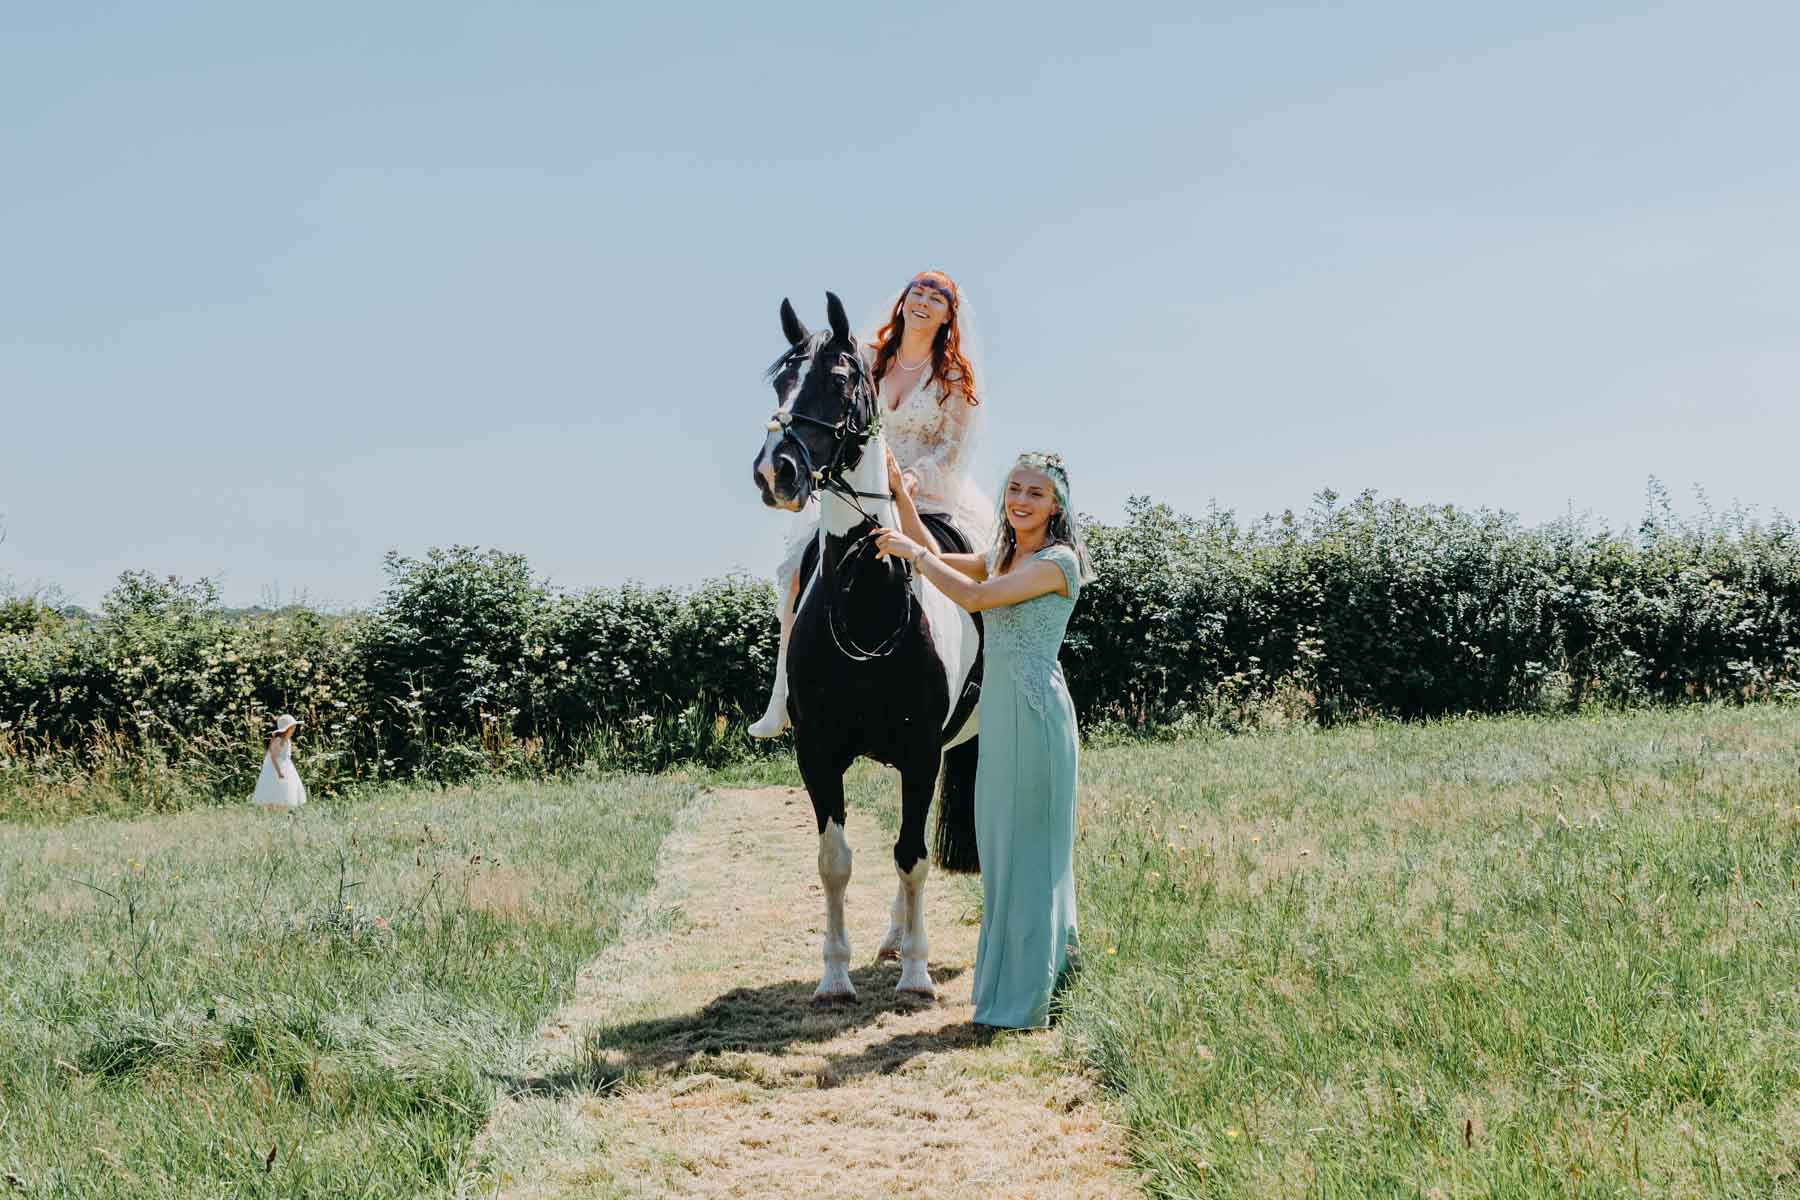 the bridesmaid leads the bride sitting on horseback to the handfasting ceremony